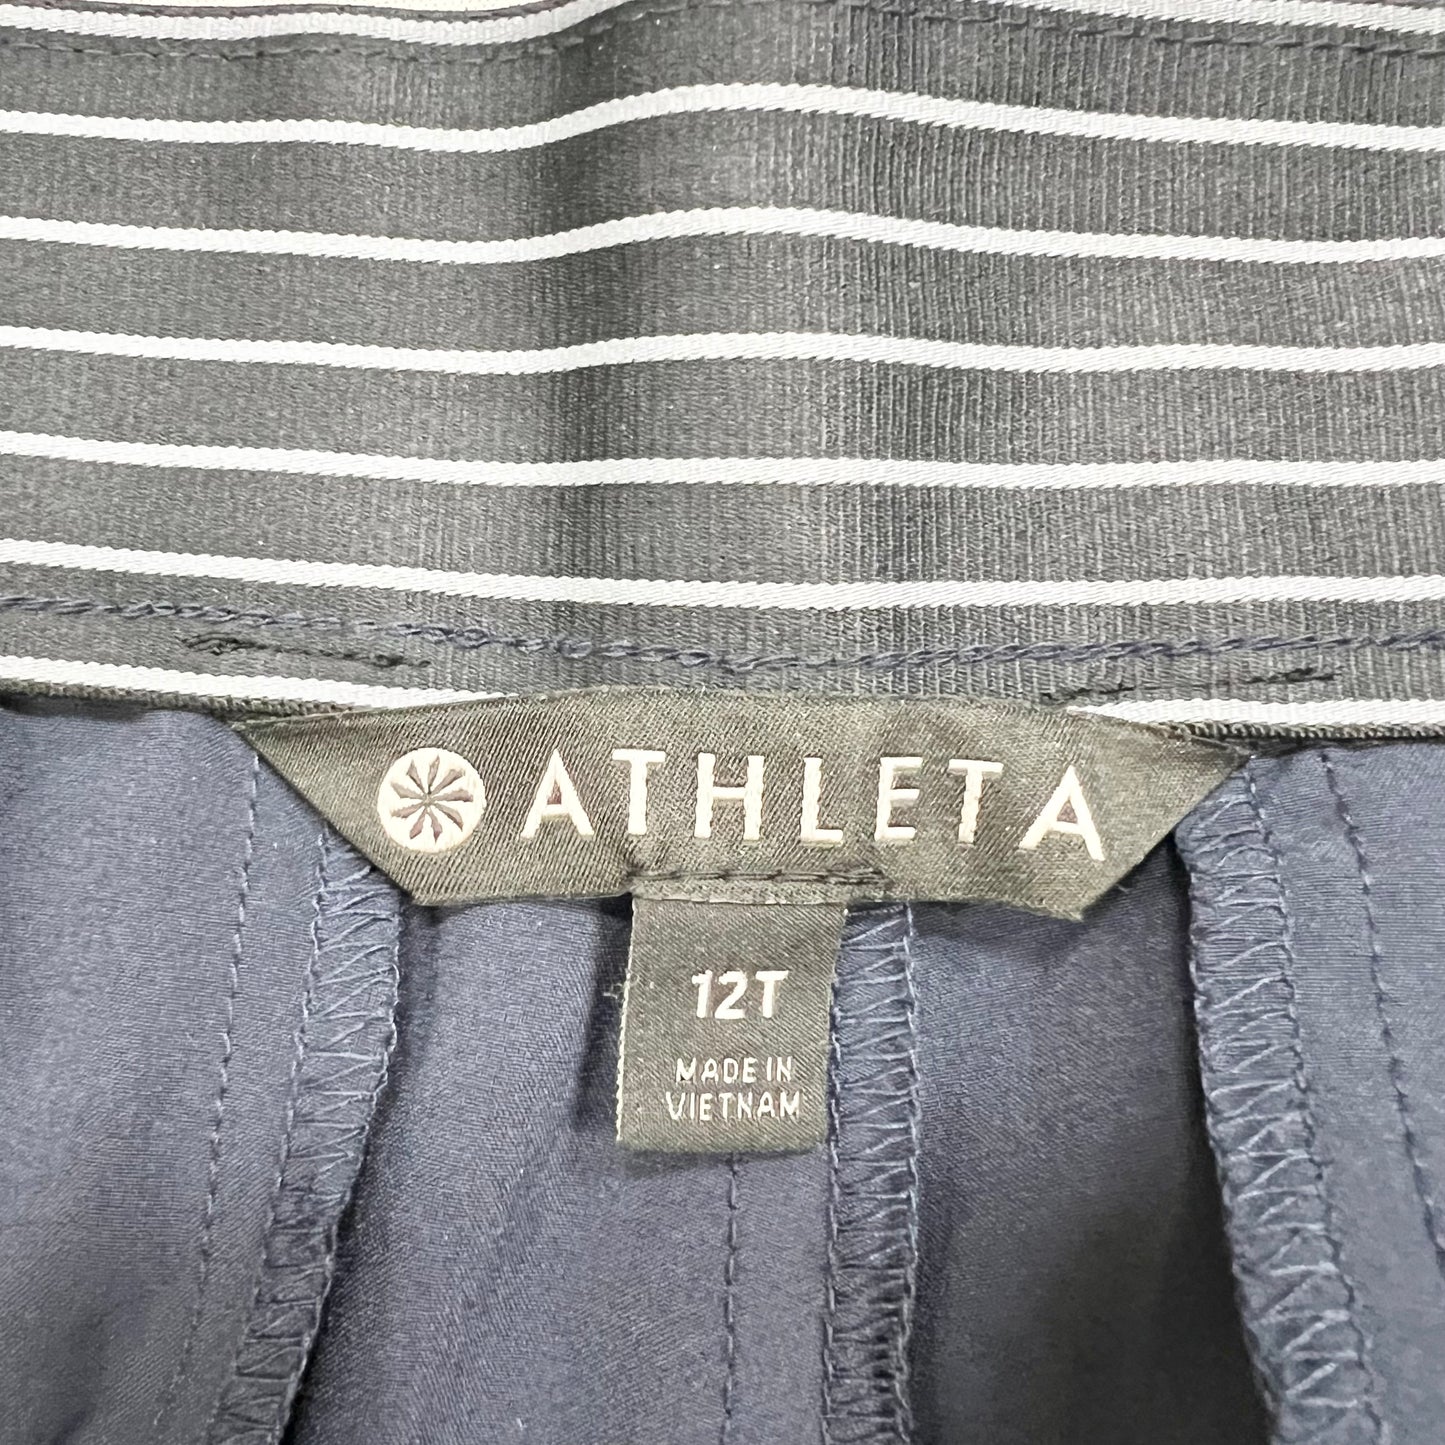 Athletic Pants By Athleta  Size: 12tall